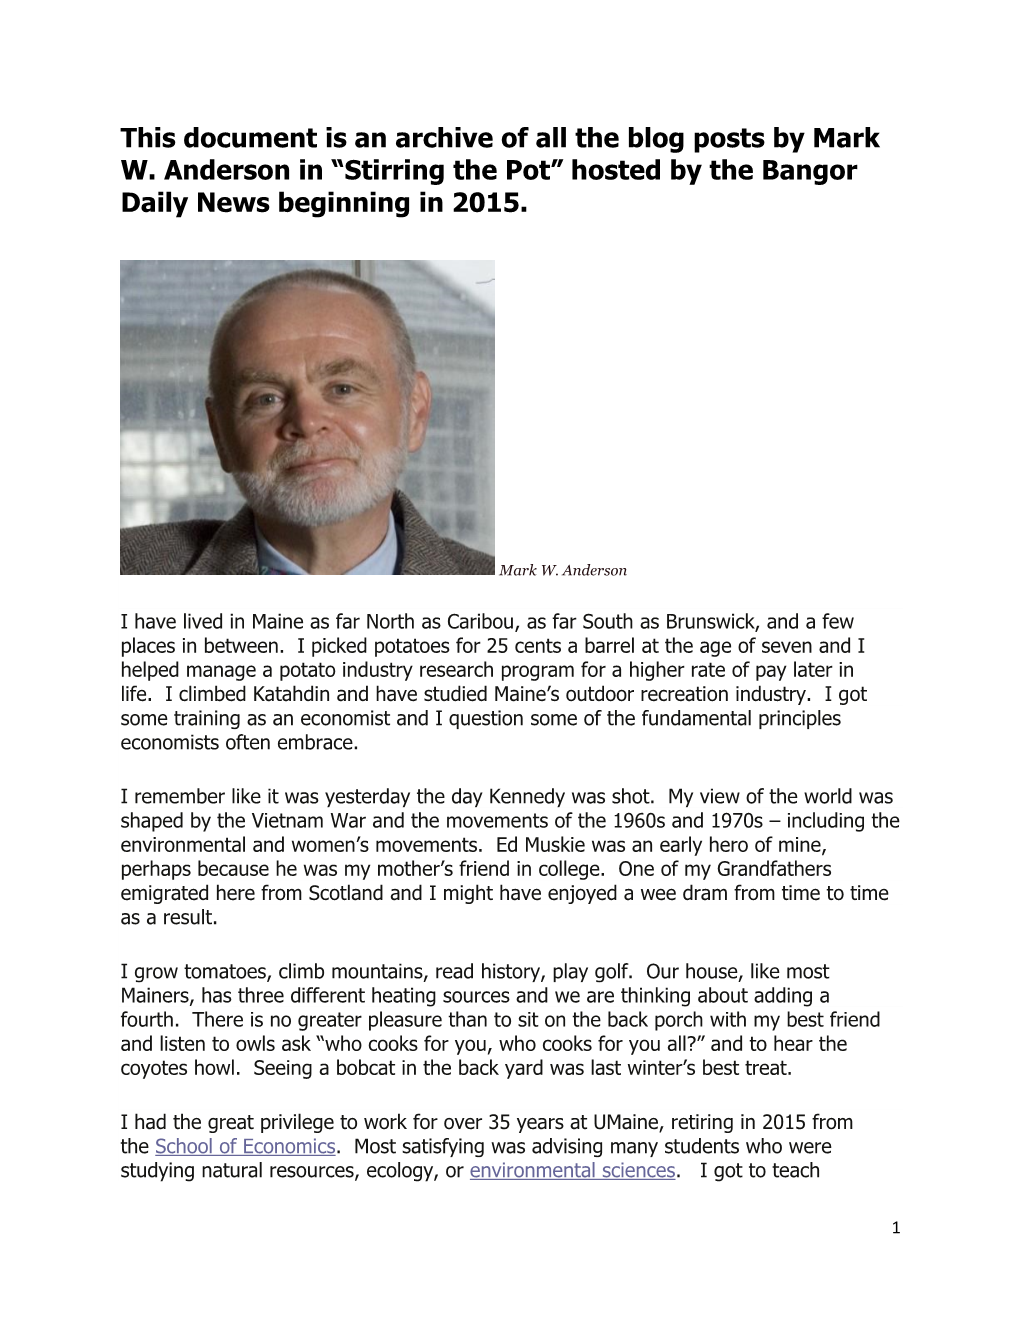 Stirring the Pot” Hosted by the Bangor Daily News Beginning in 2015